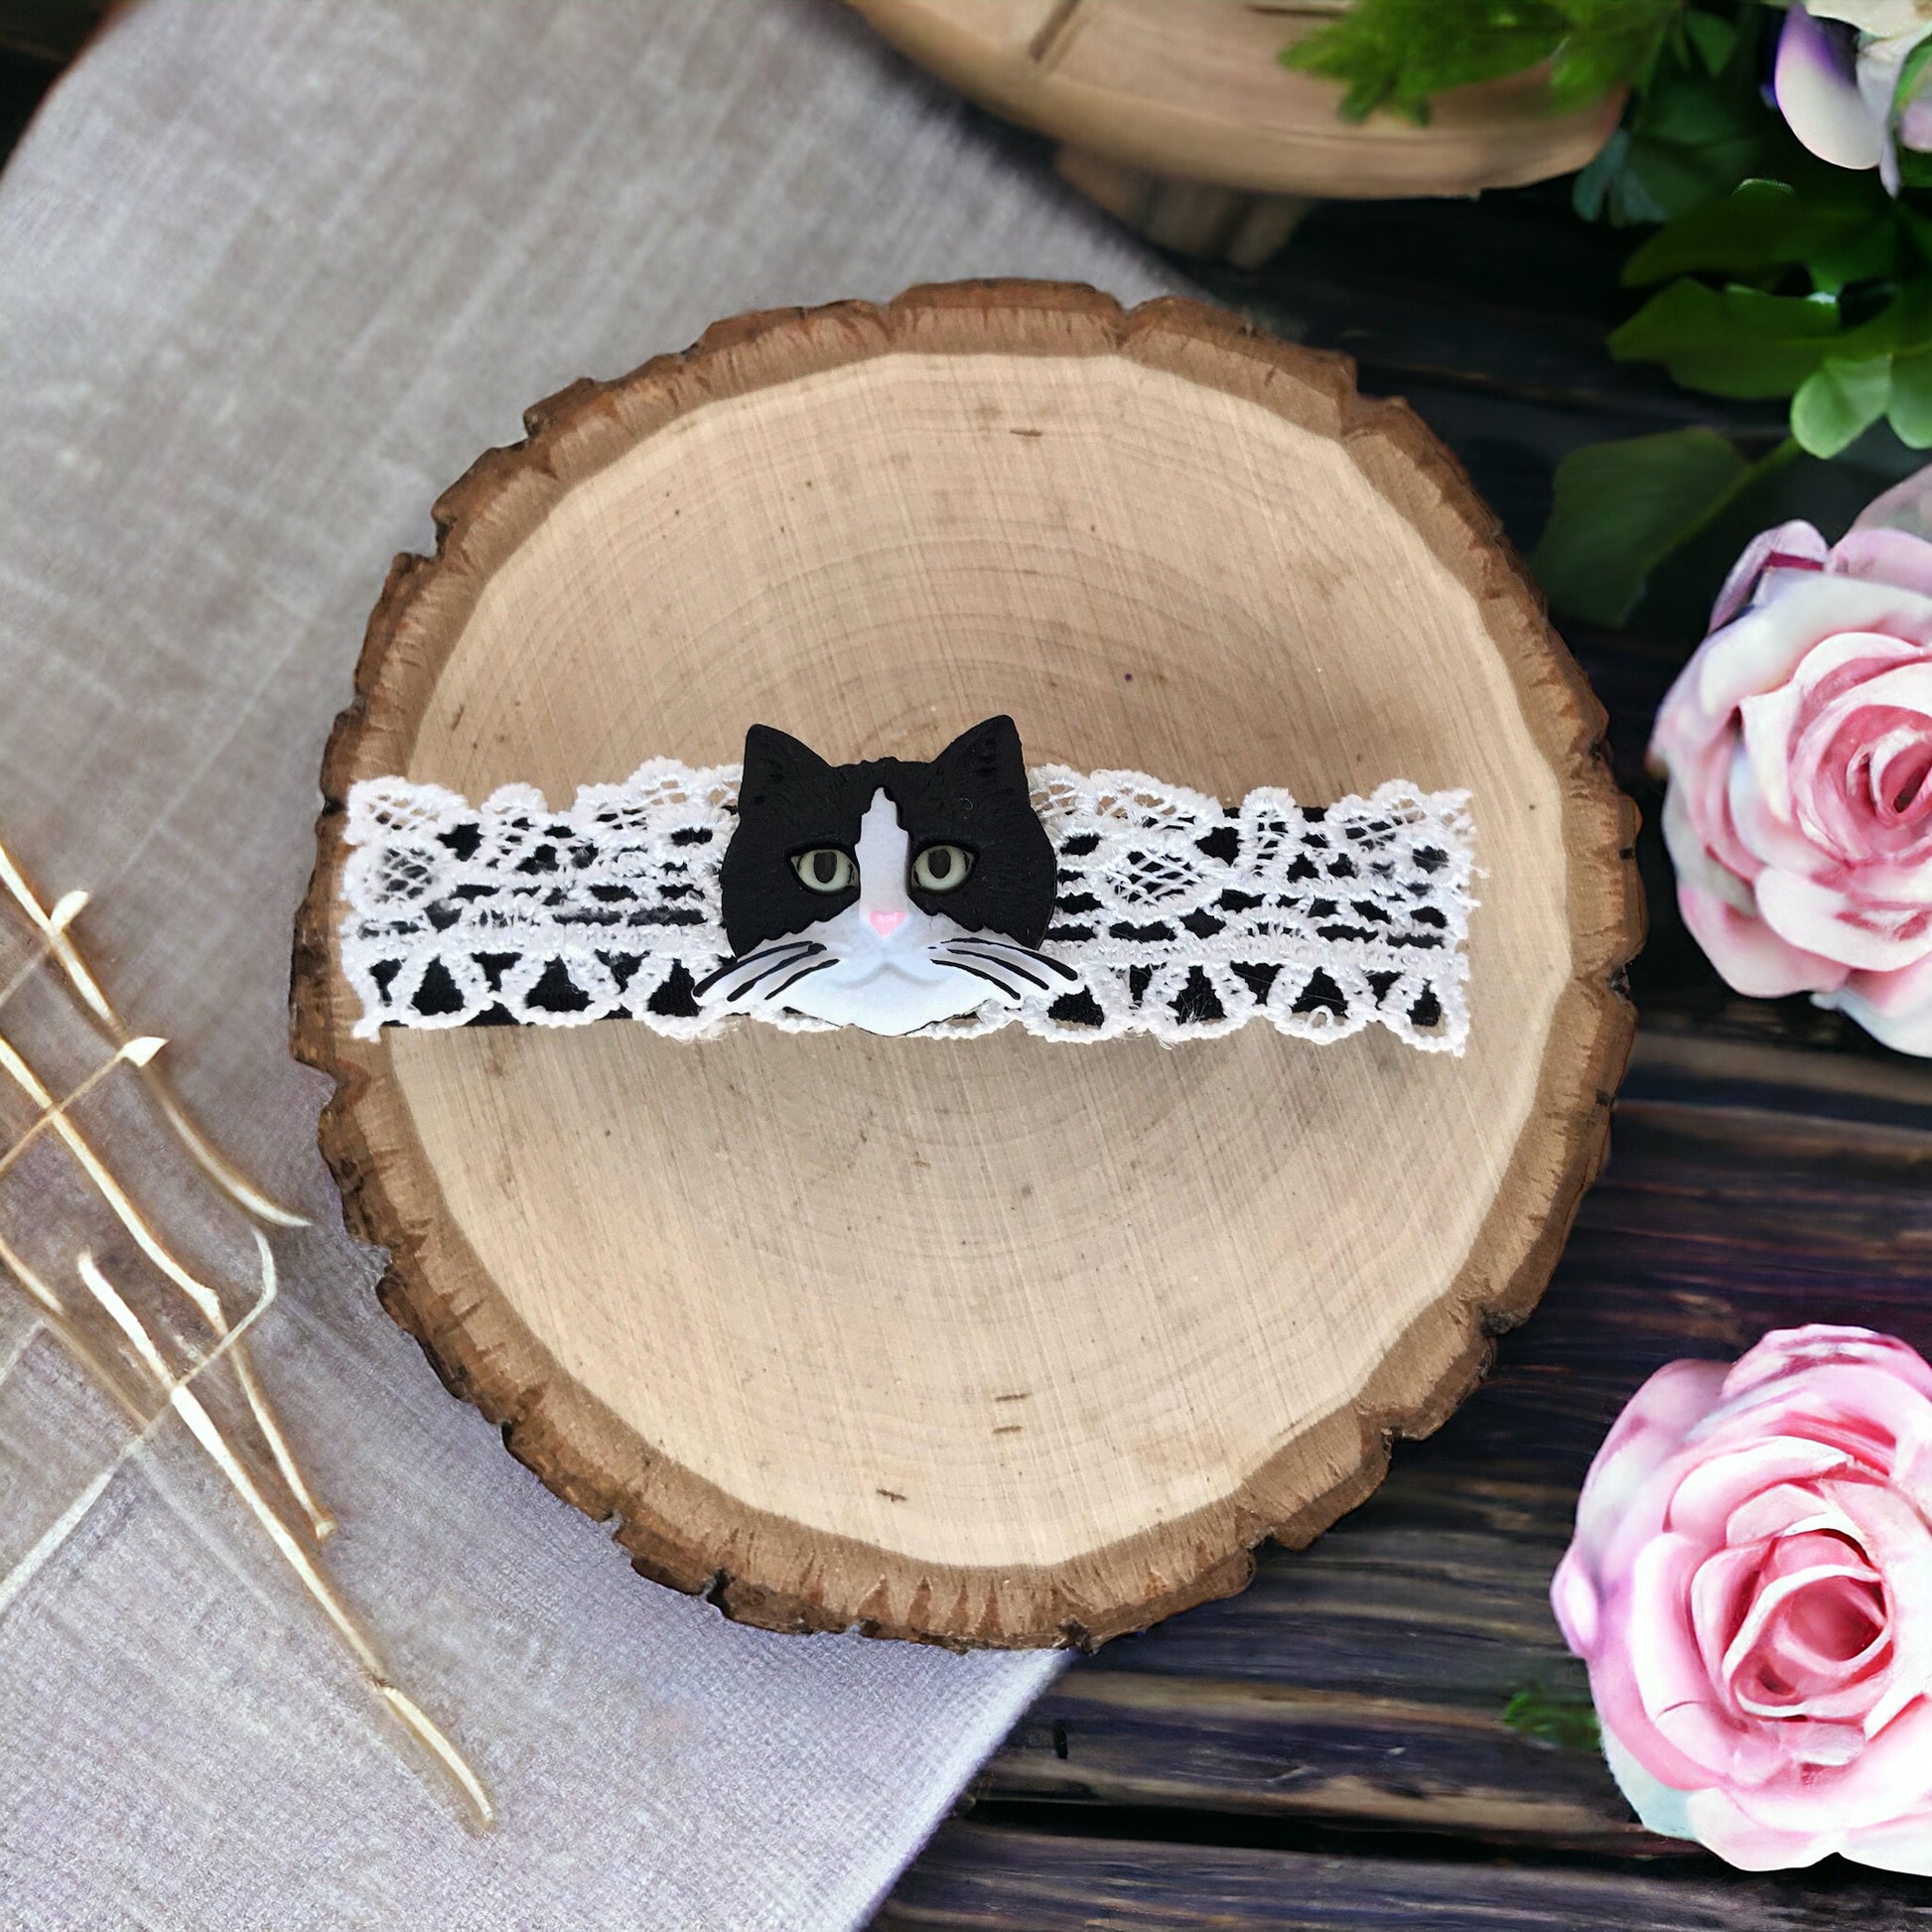 Black & White Cat Hair Barrette with Lace - Charming Feline-Inspired Hair Accessory